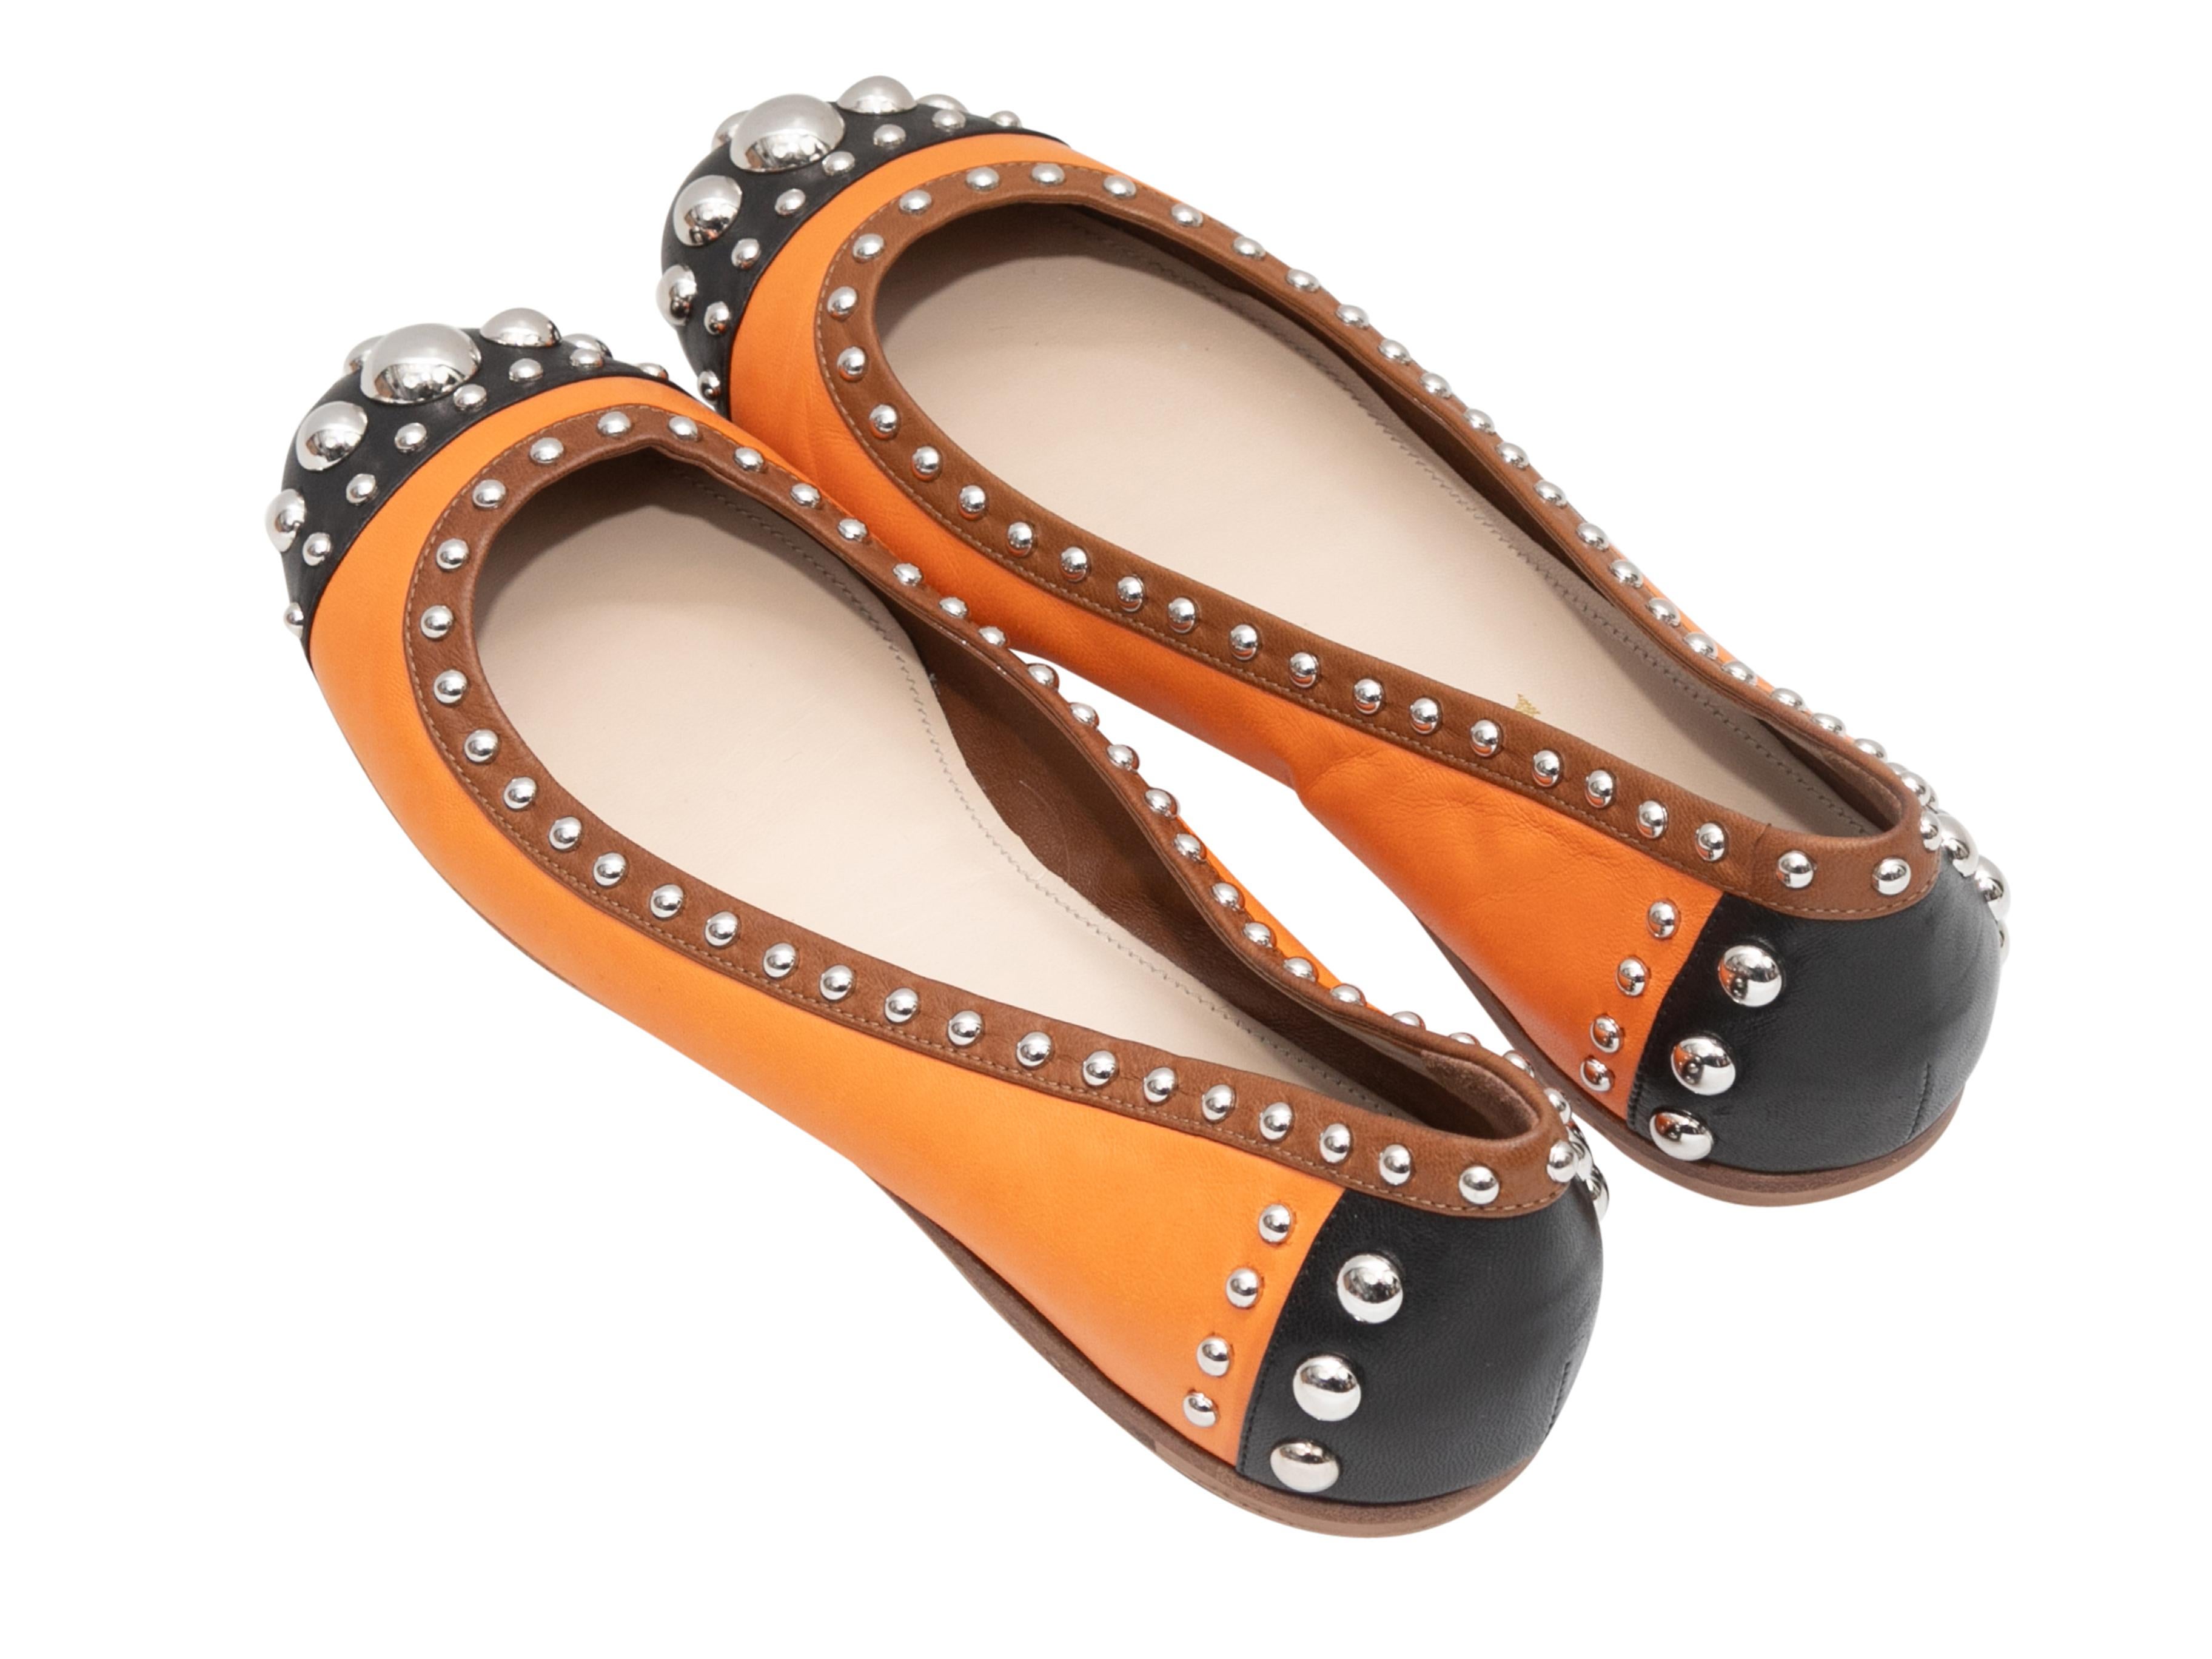 Orange & Black Prada Studded Ballet Flats Size 38 In Good Condition For Sale In New York, NY